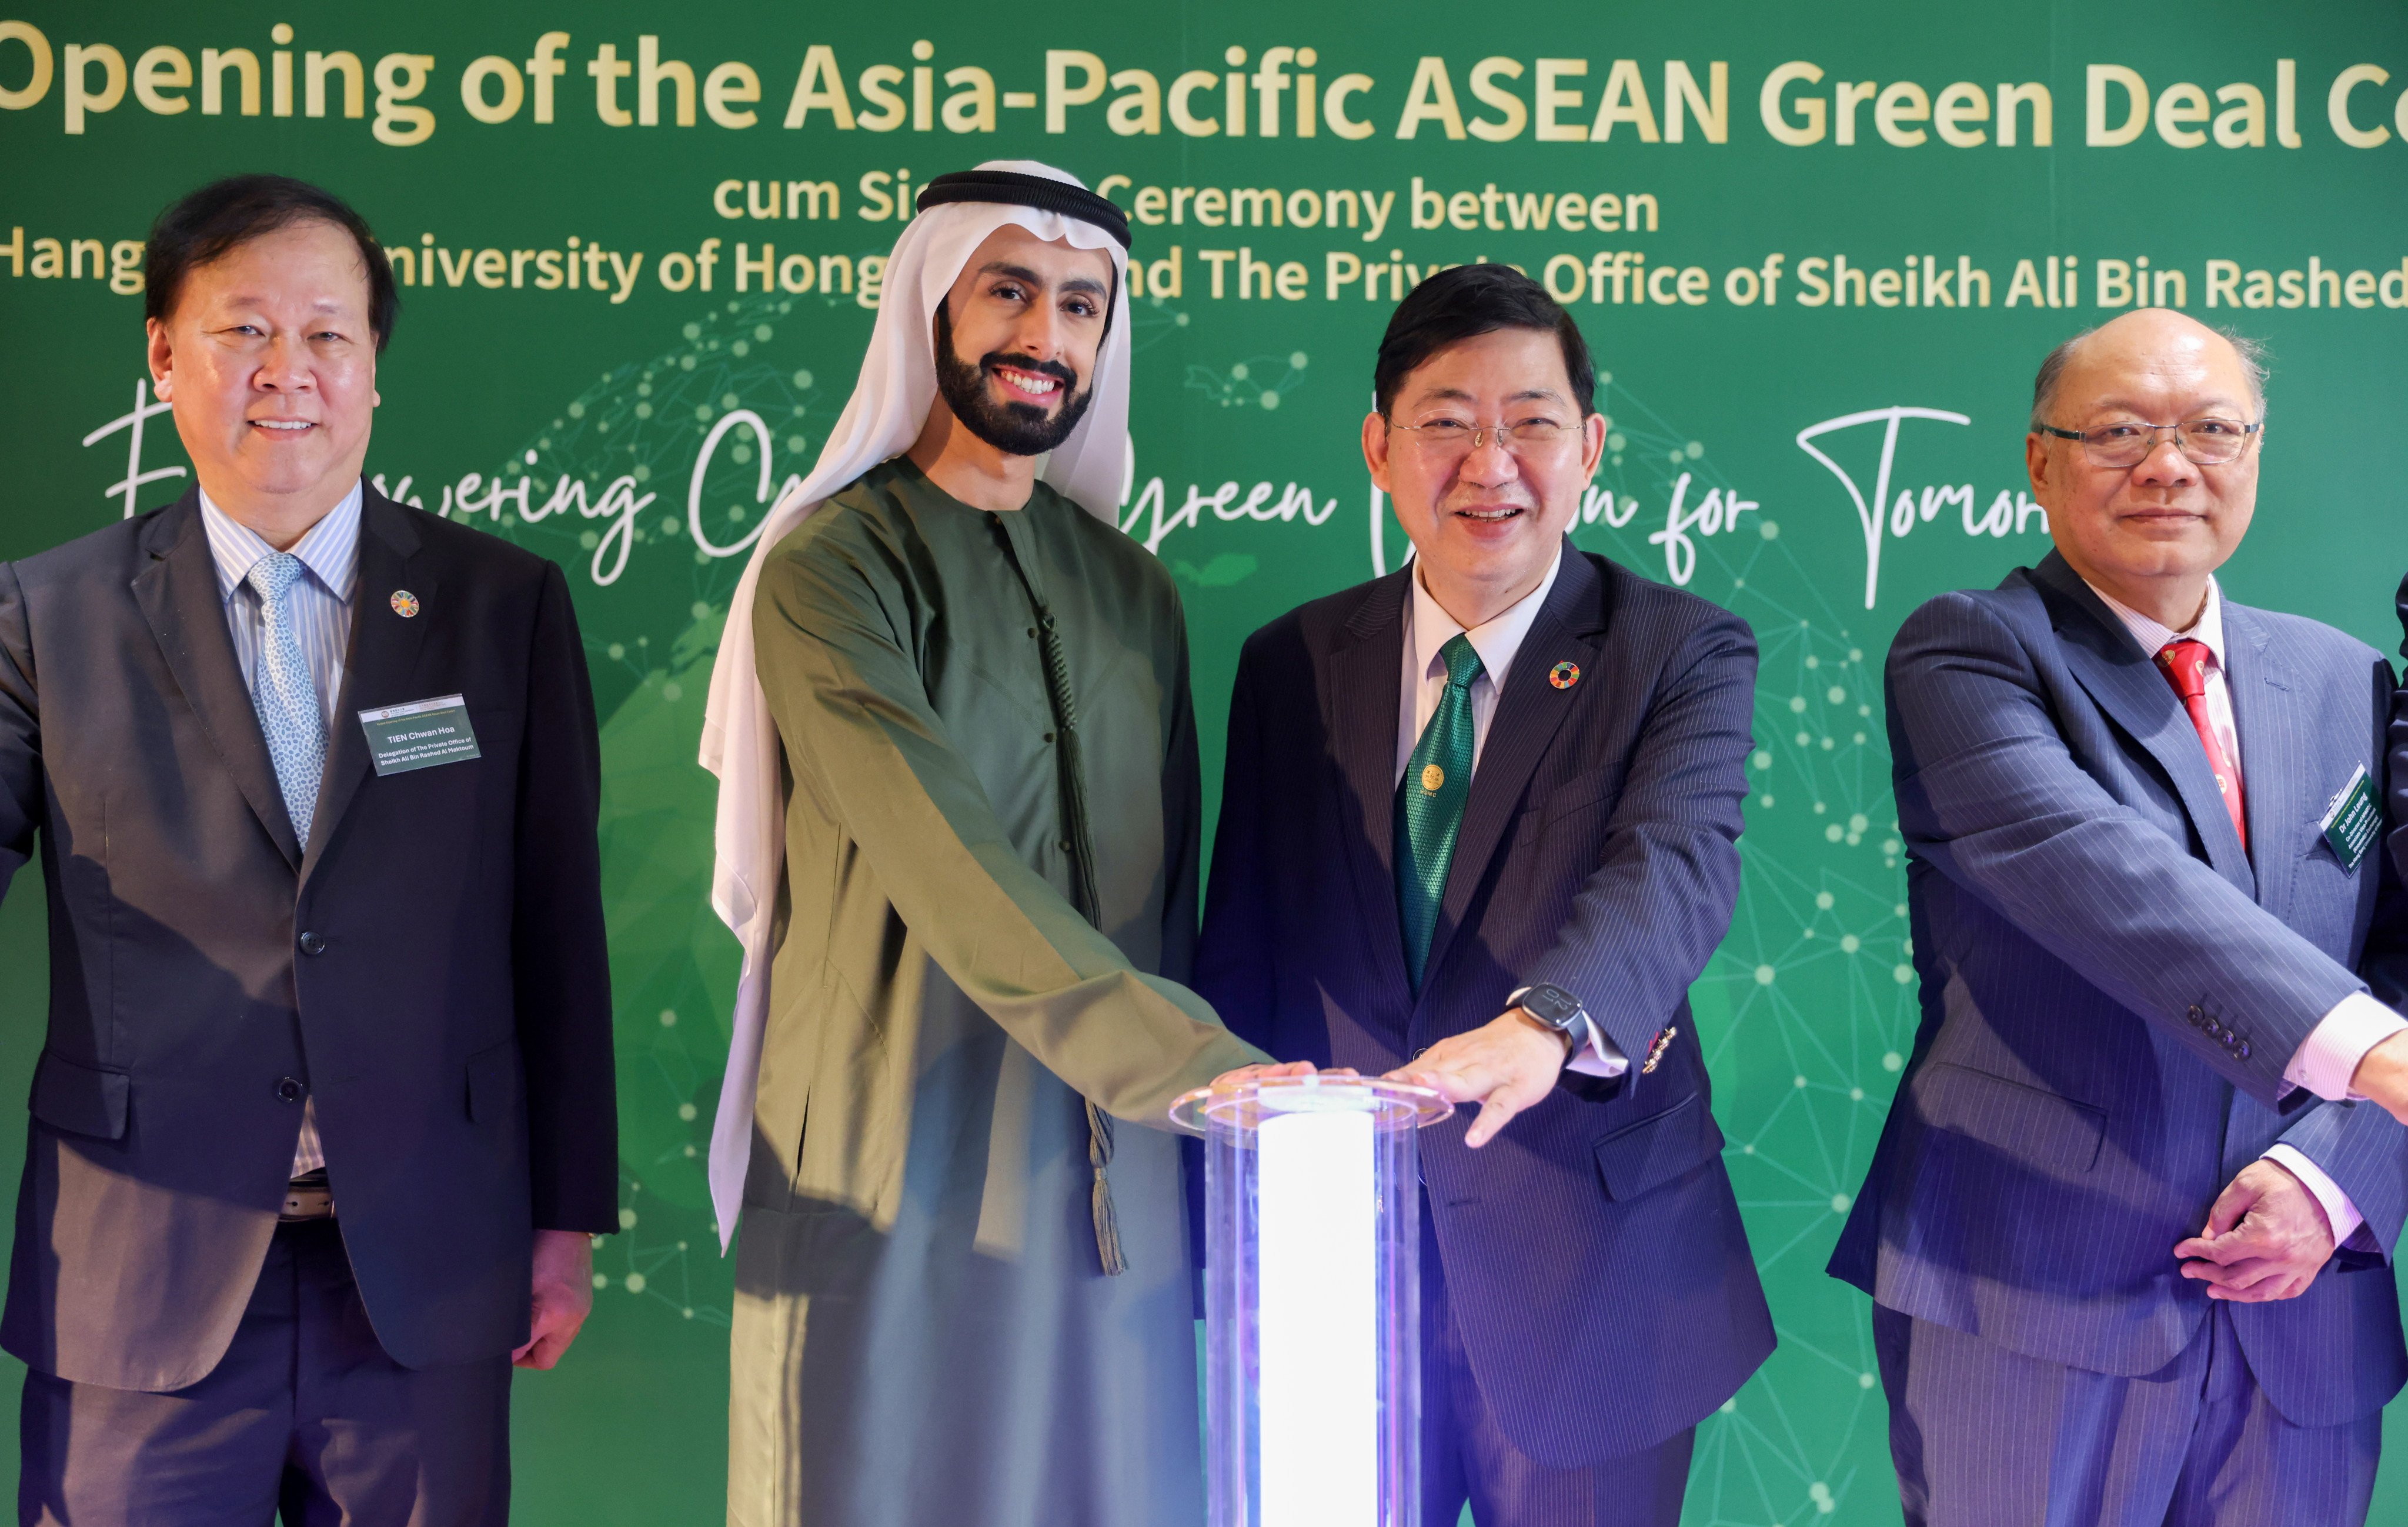 Sheikh Ali Rashed Ali Saeed Al Maktoum (second from left) attends a media event with his office’s director of international strategic relations William Tien (far left). Photo: Yik Yeung-man